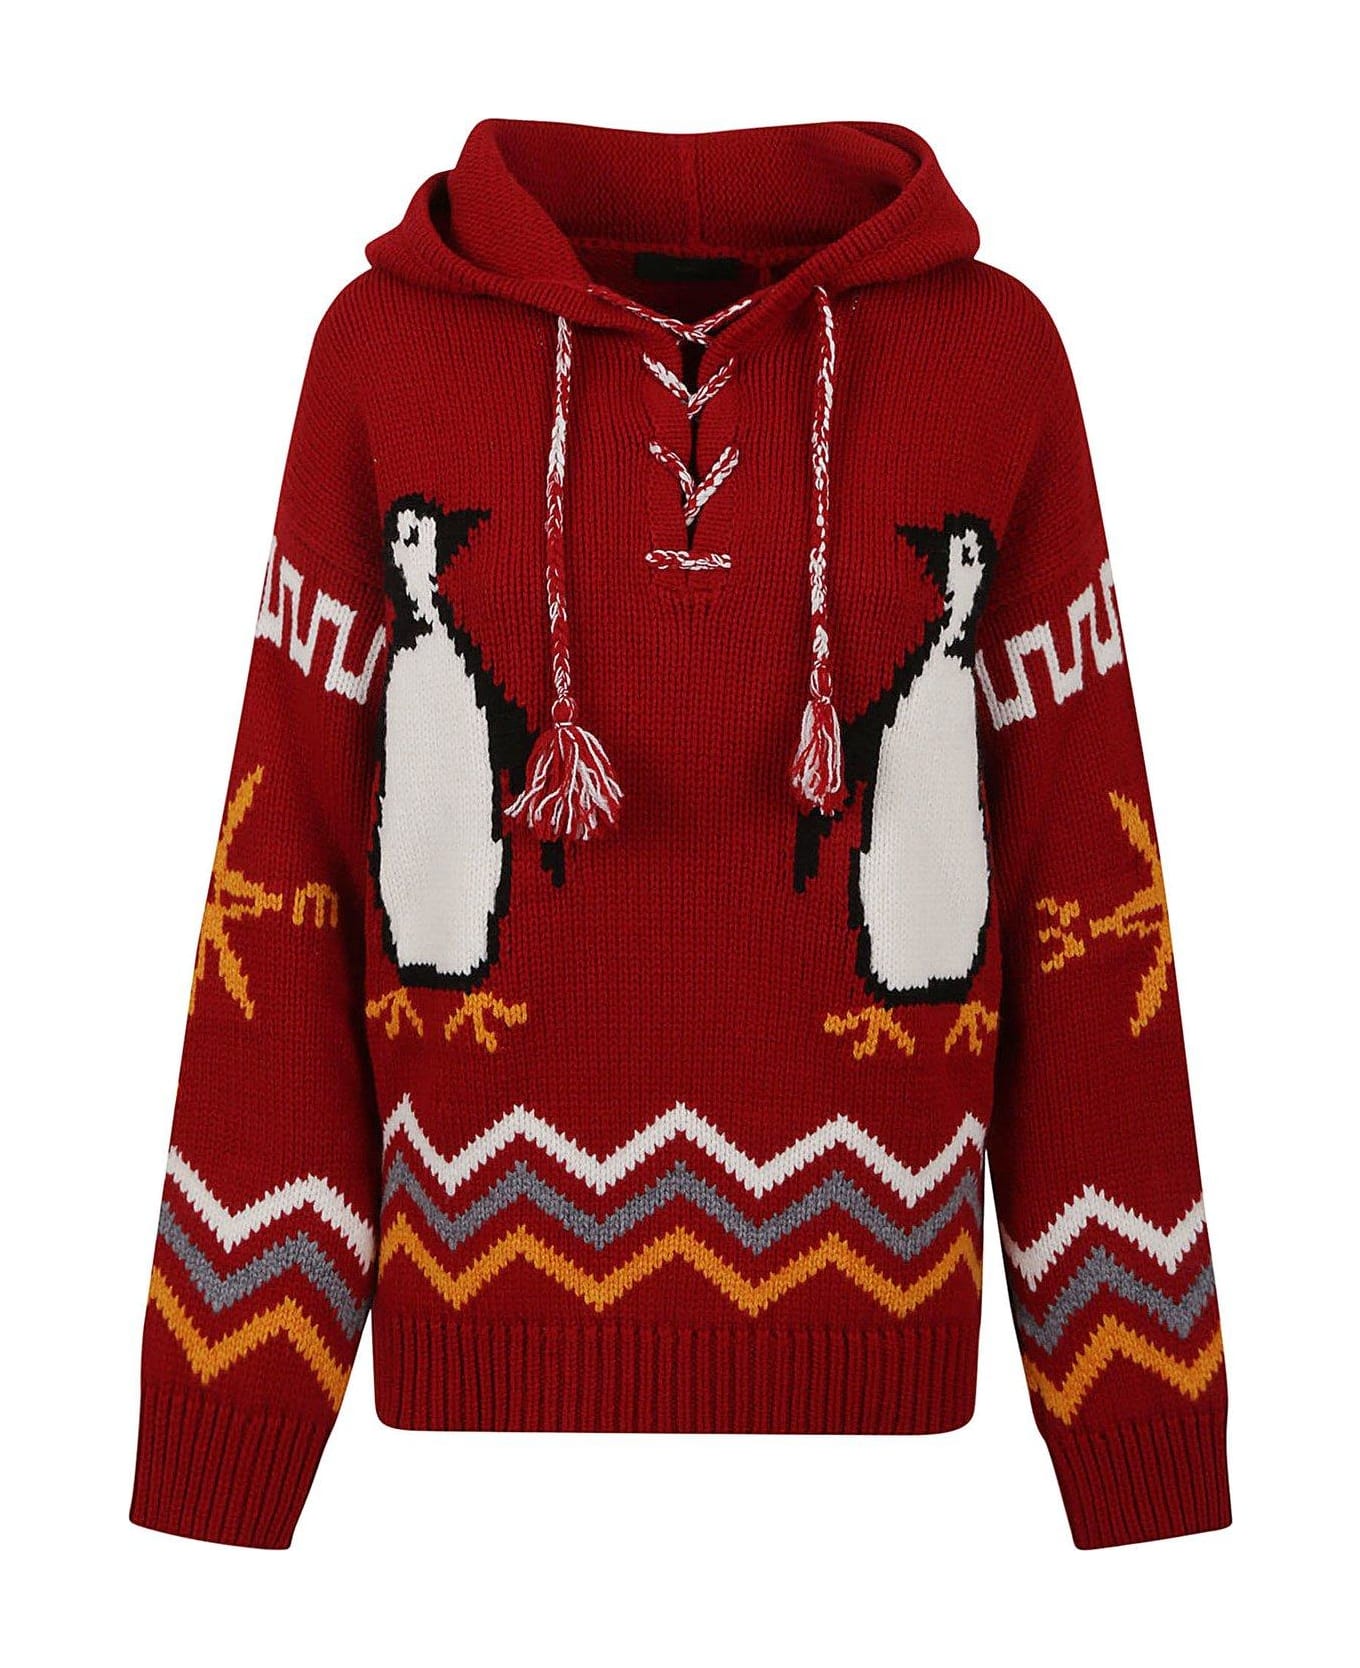 Alanui For The Love Of Pengui Drawstring Hoodie - FIRE